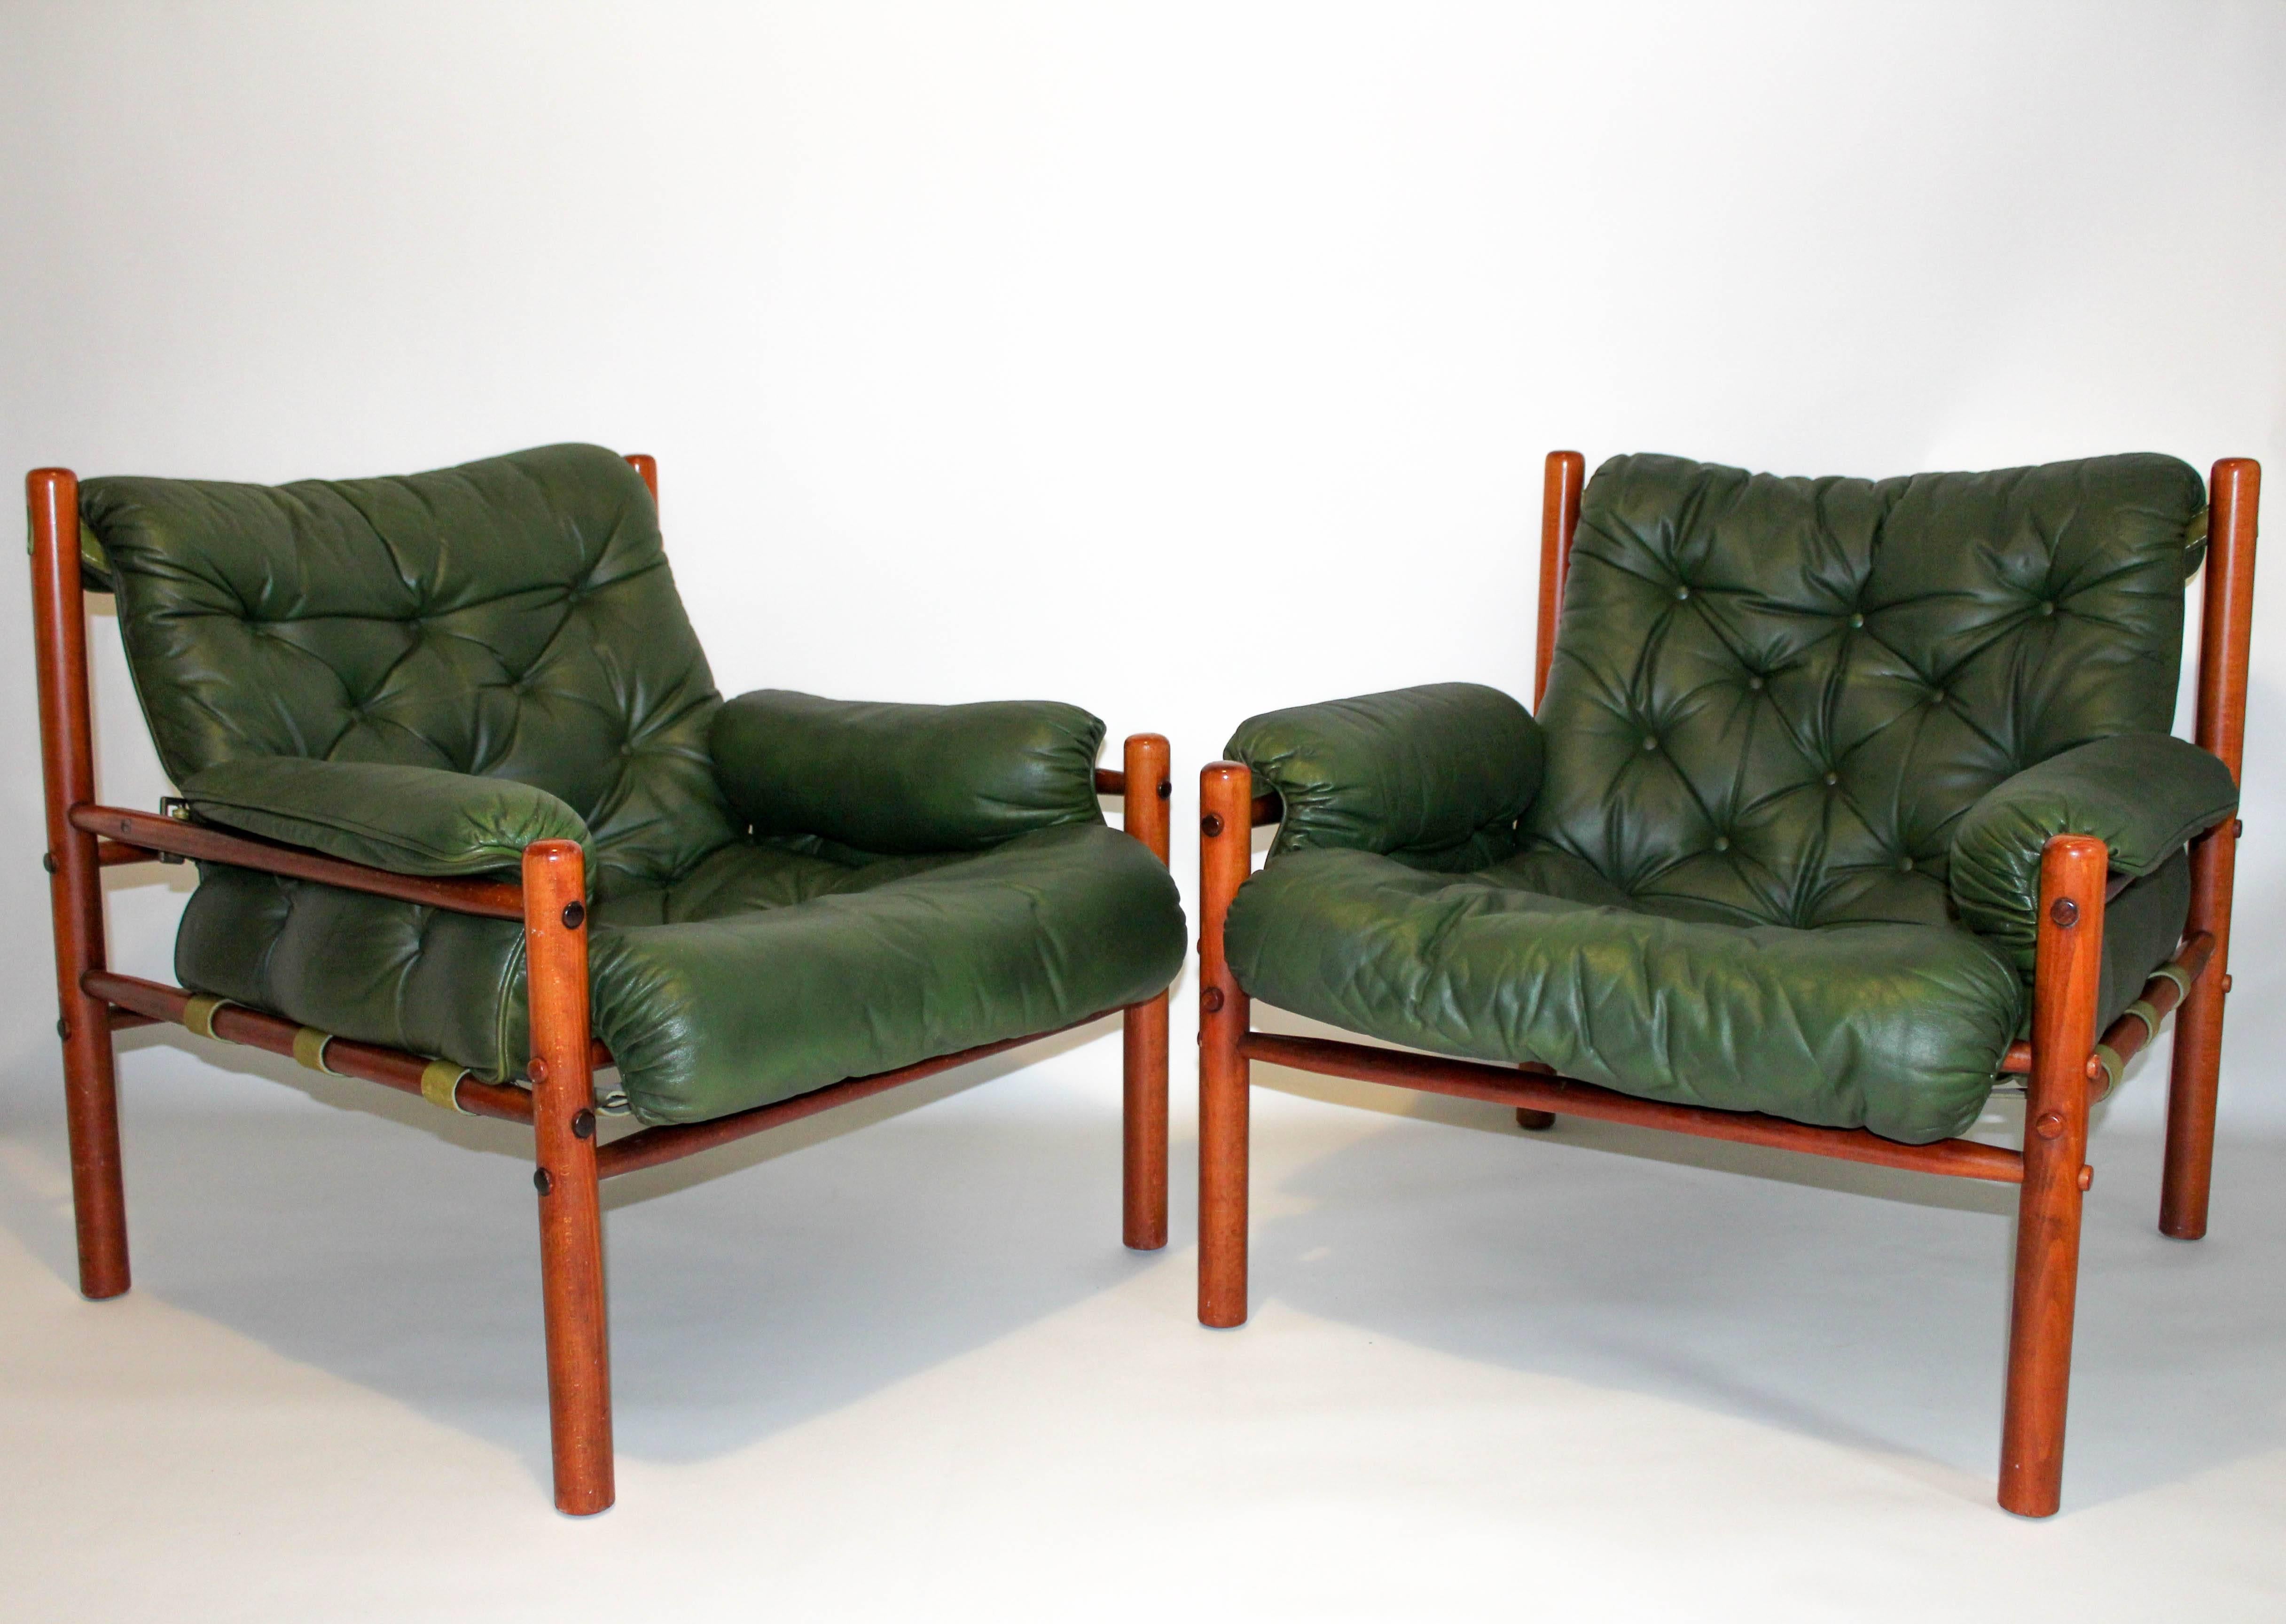 Scandinavian Modern Pair of Arne Norell Green Leather Lounge Chairs